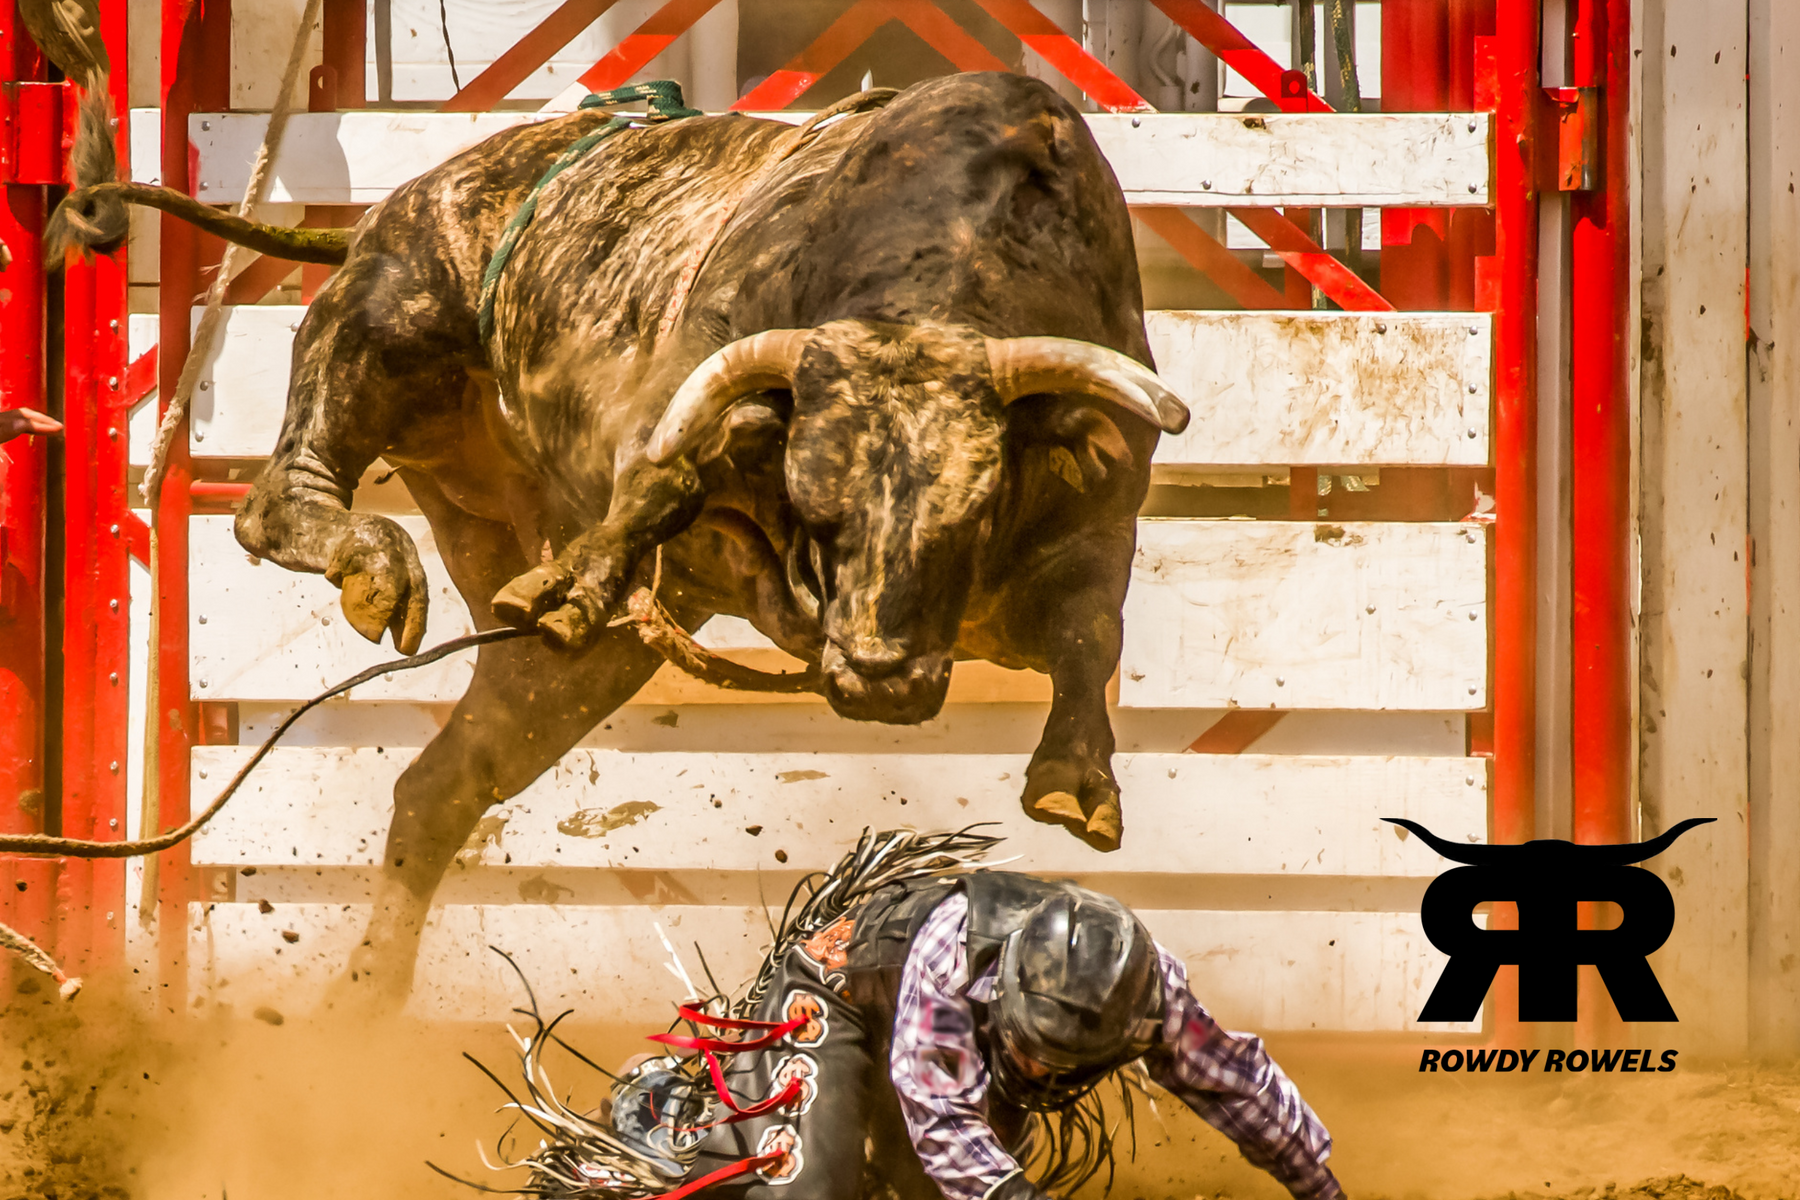 Bull Riding has Become a Highly Popular and Competitive Sport